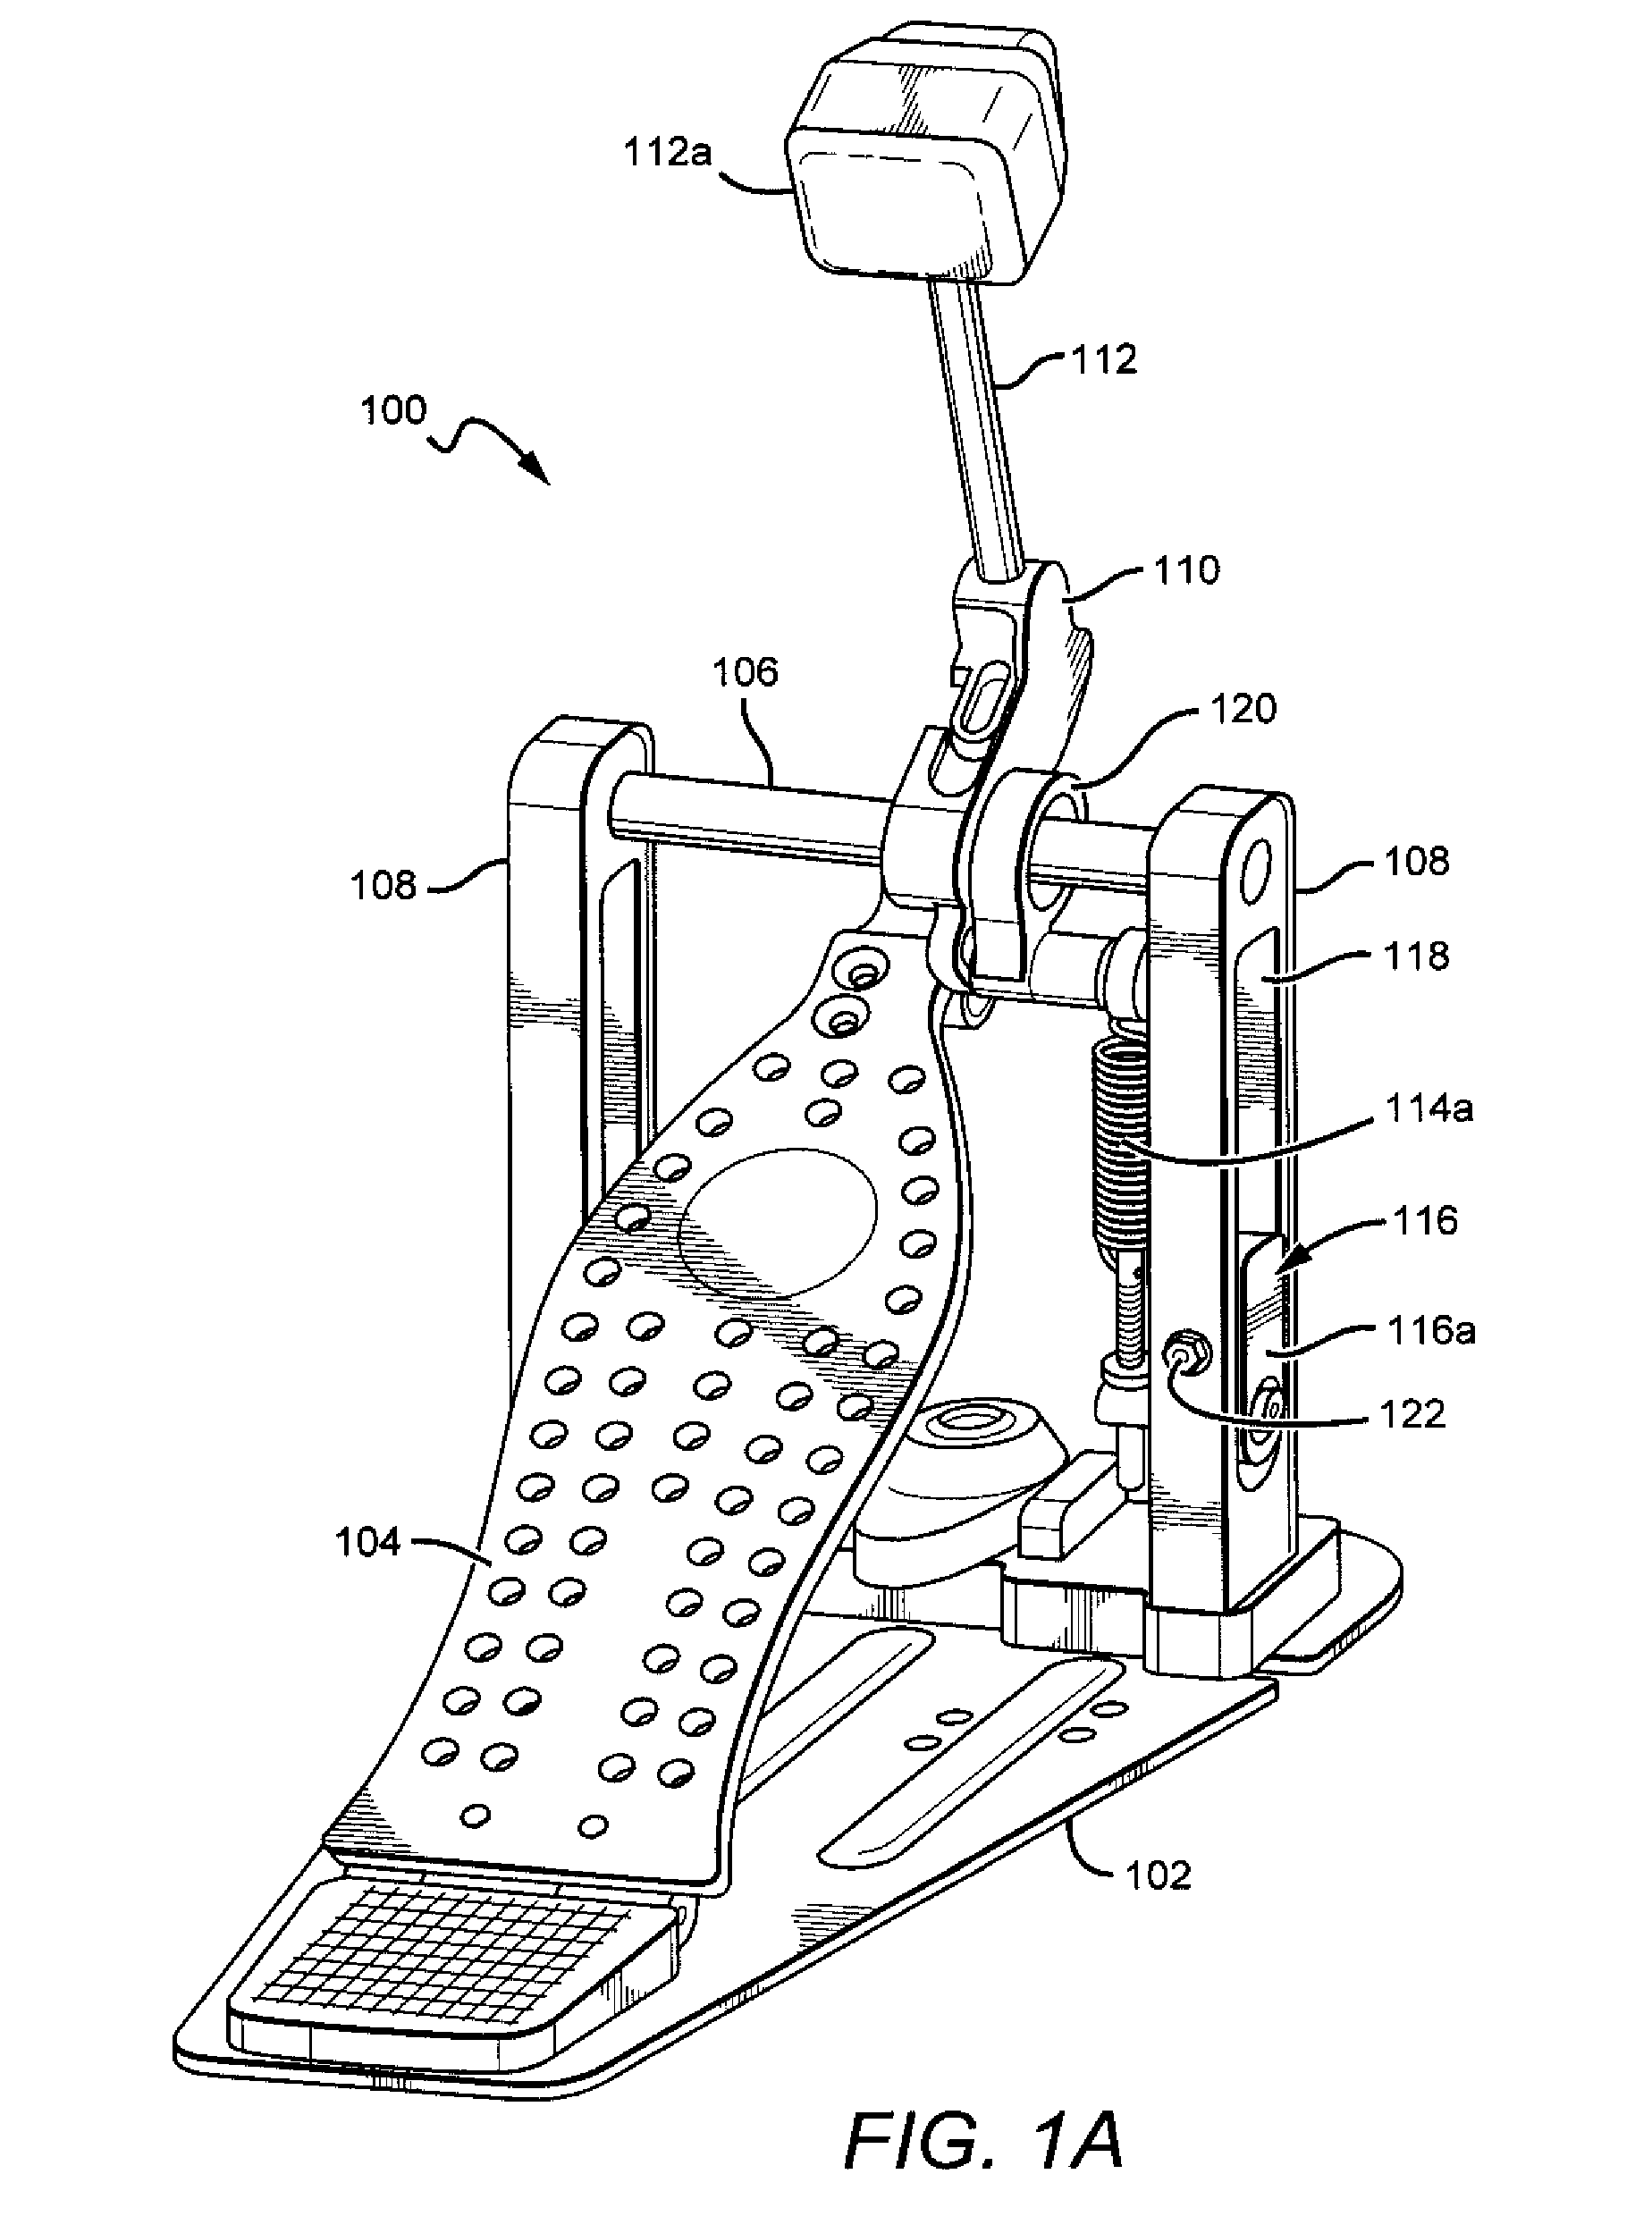 Drum pedal with adjustment features and interlocking features